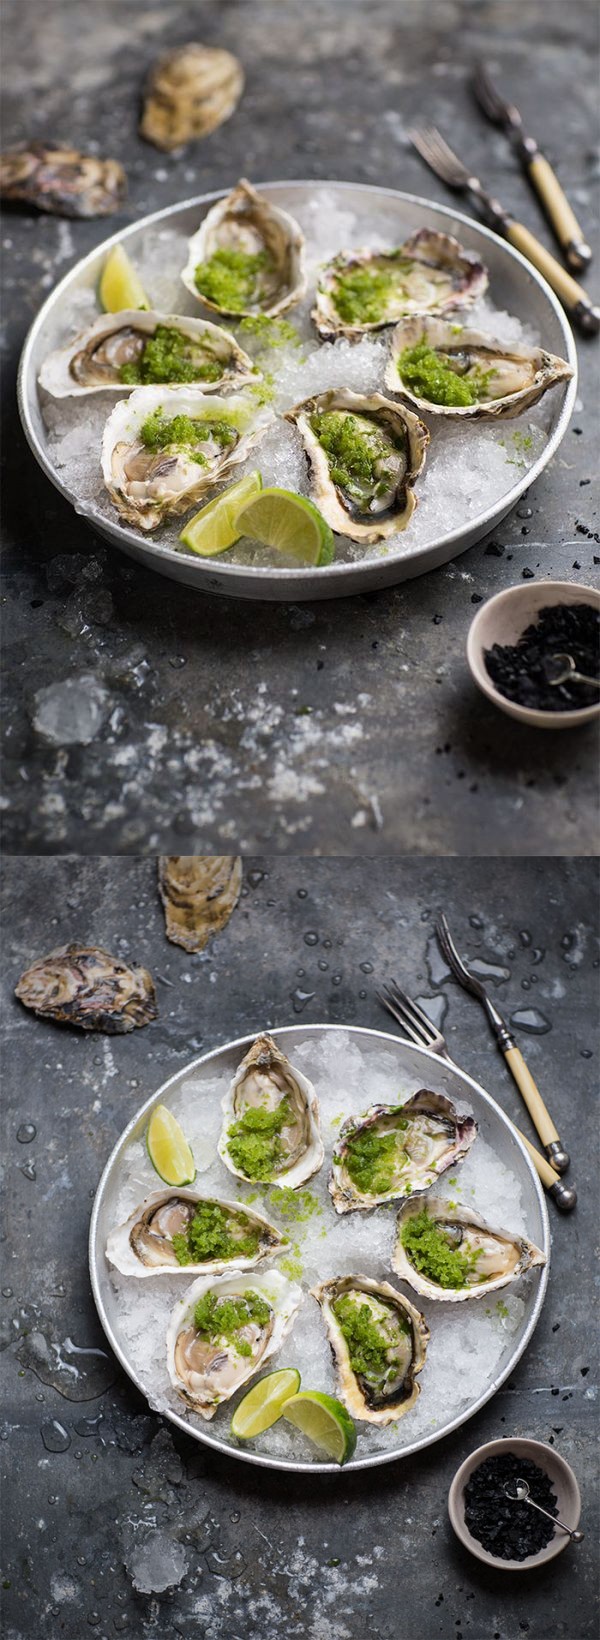 Oysters with spicy cucumber granita